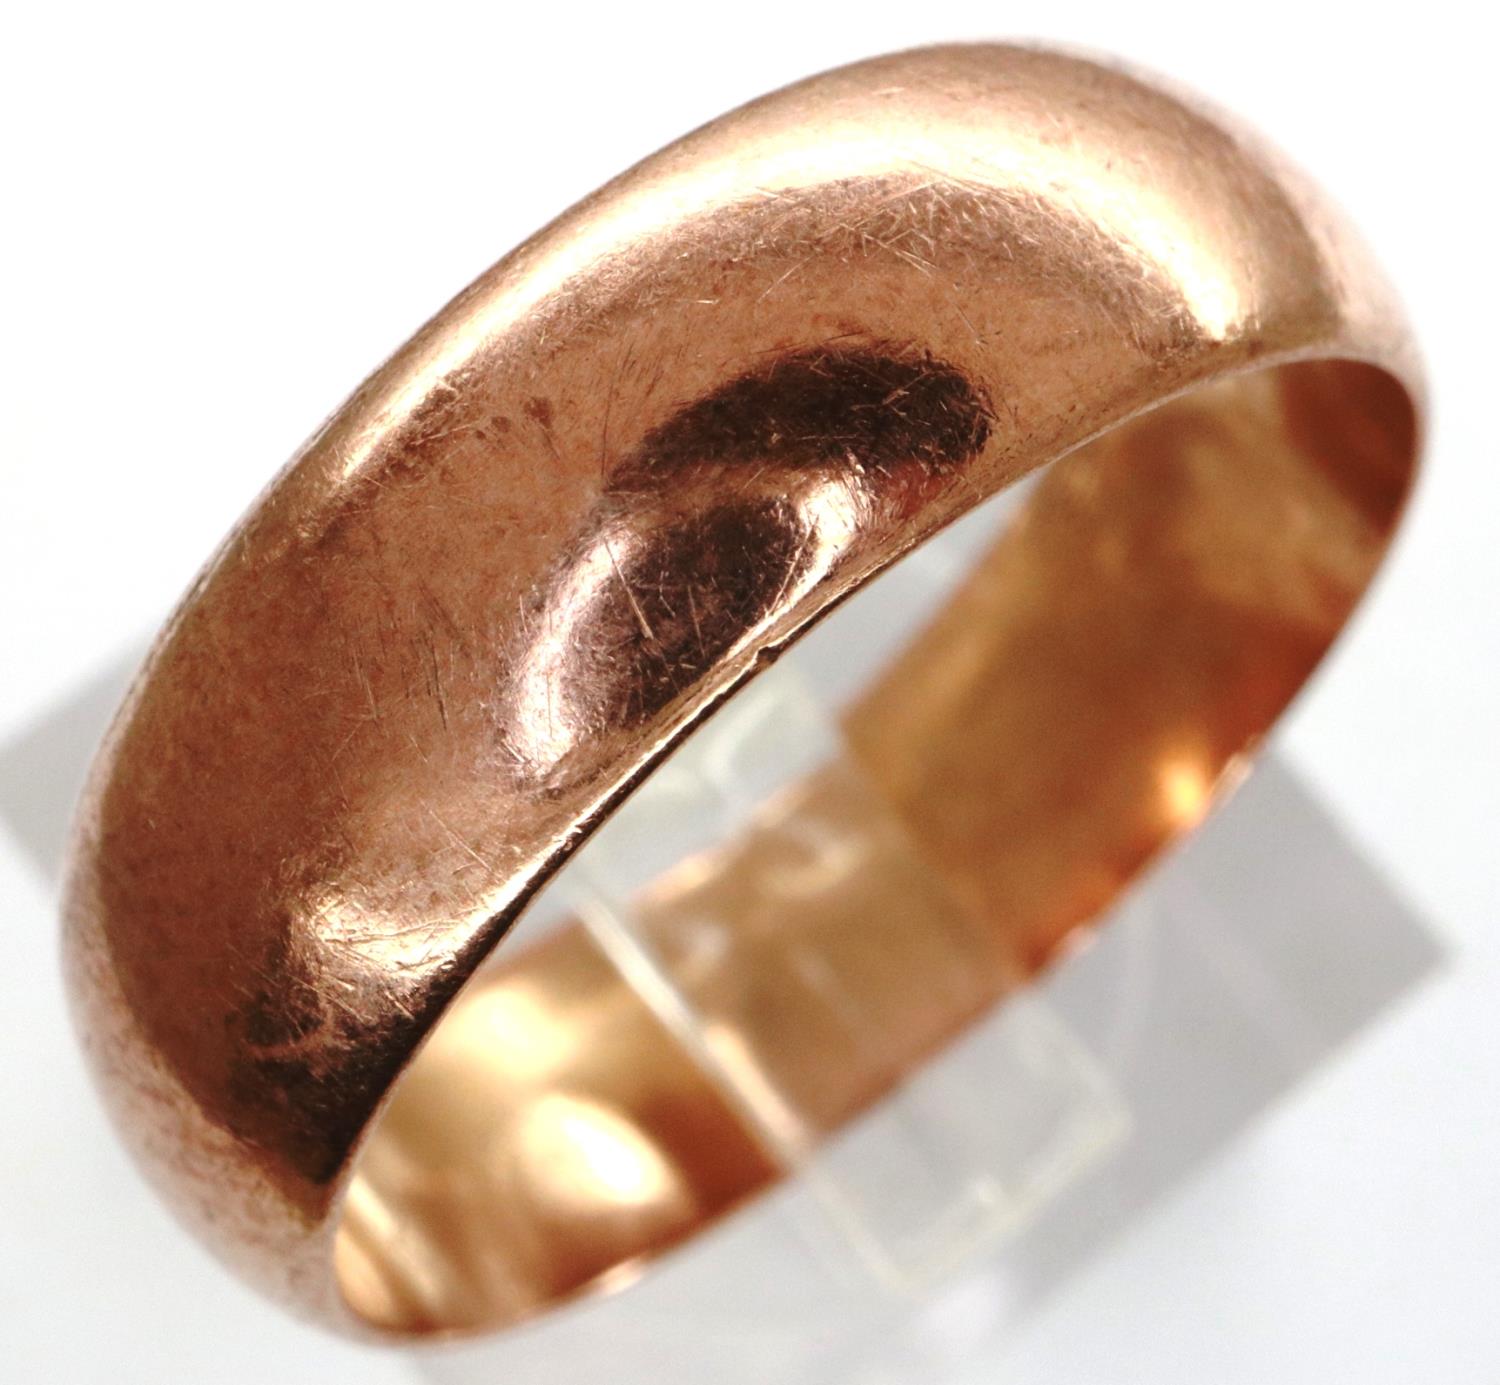 9ct rose gold wedding band, size S, 4.3g. P&P Group 1 (£14+VAT for the first lot and £1+VAT for